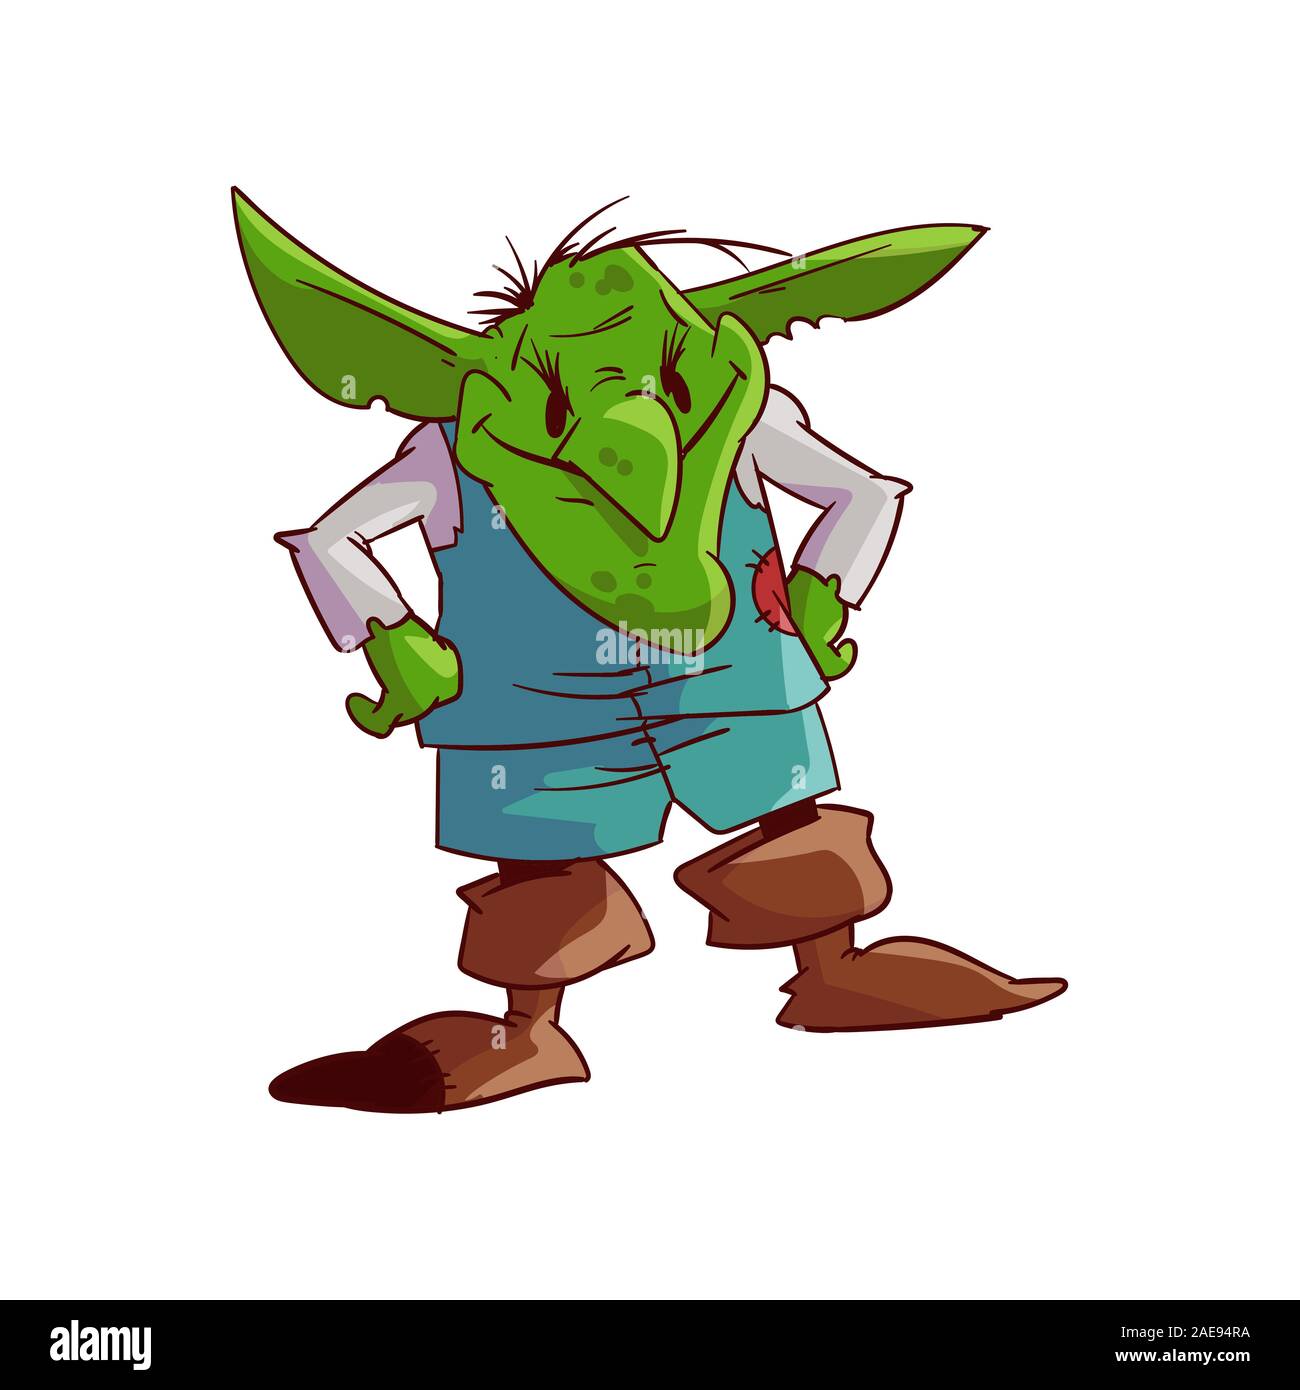 Colorful vector illustration of a cartoonish, comic style green goblin or troll Stock Vector